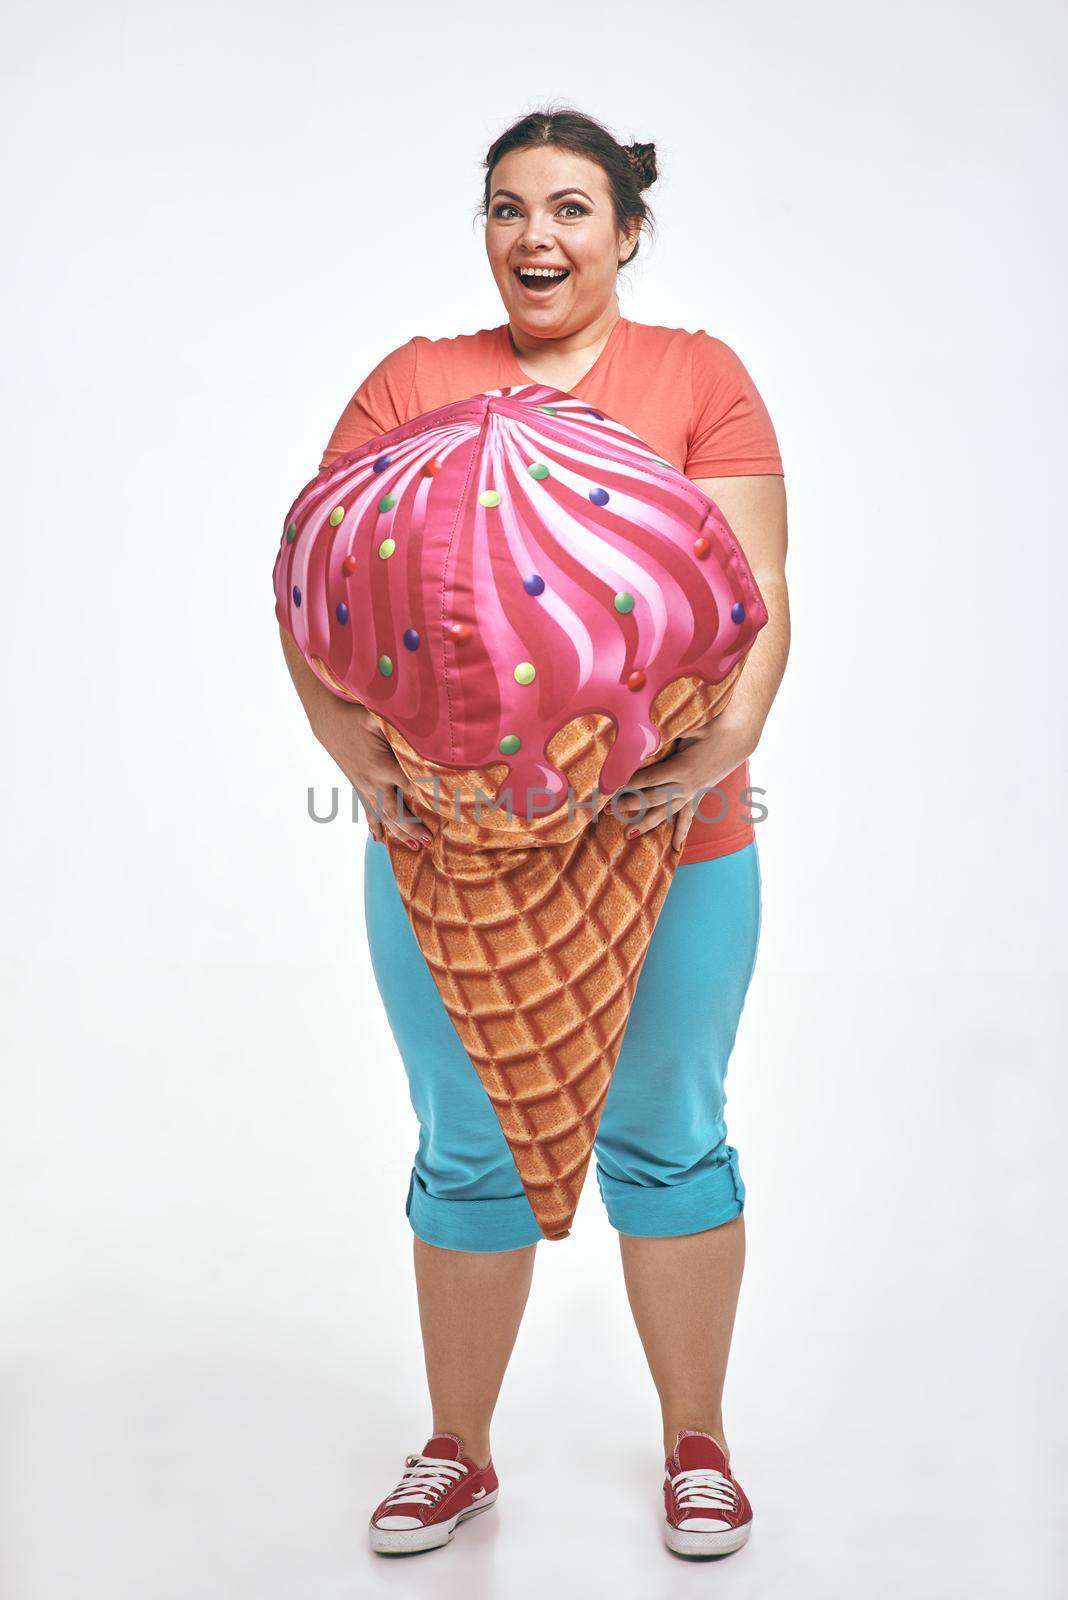 Brunette, chubby woman is holding a huge ice cream by friendsstock